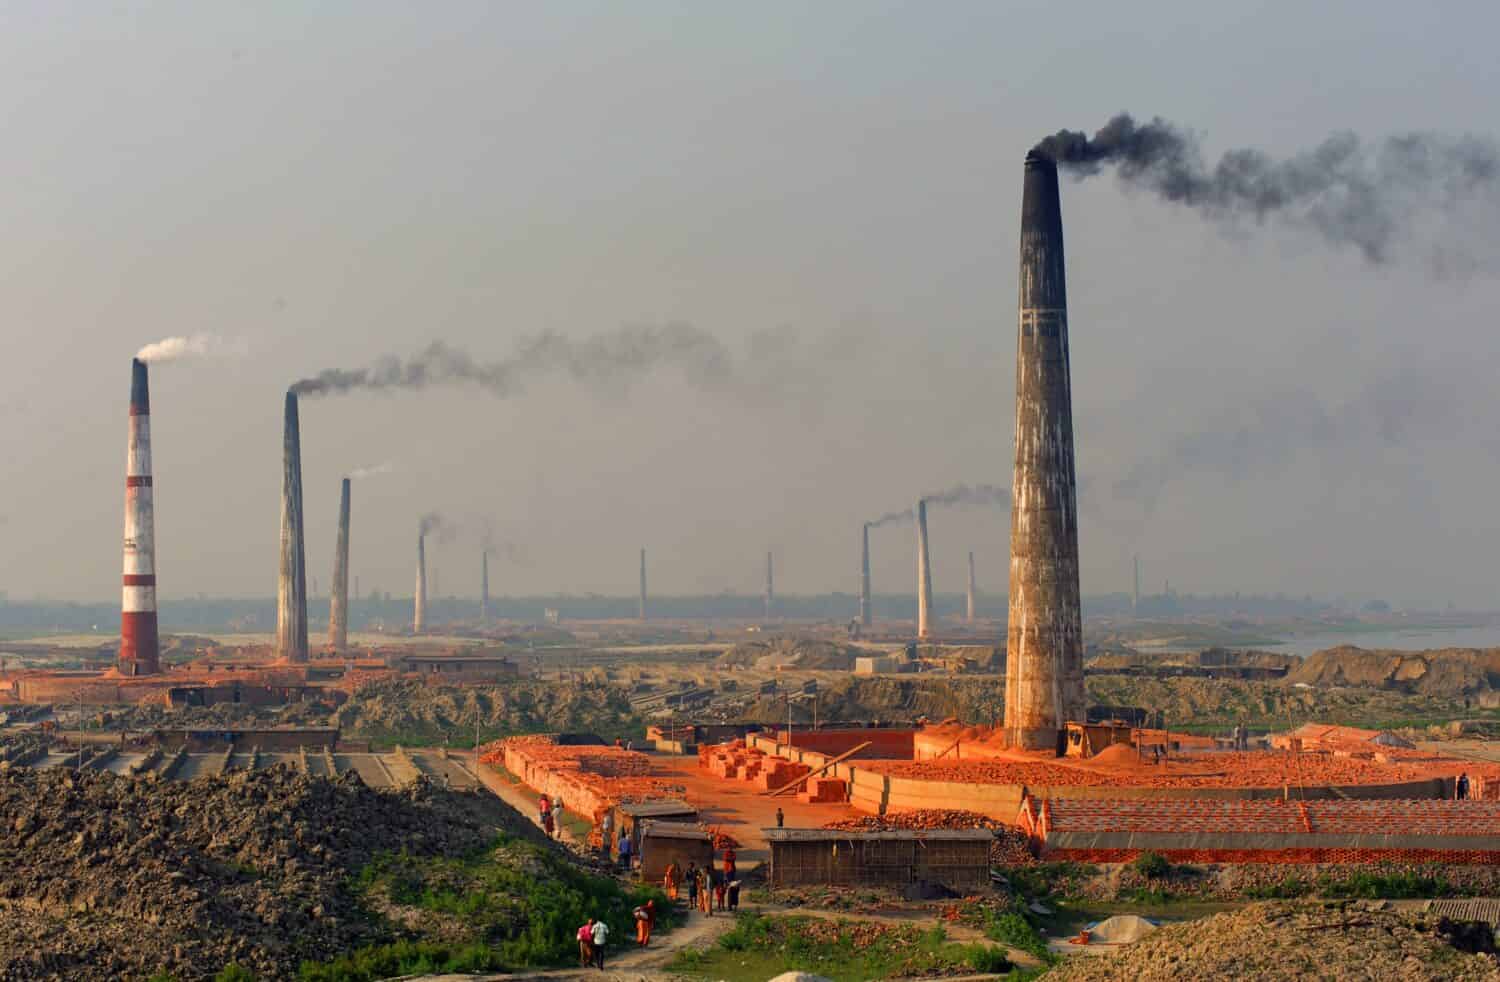 Brick factories in Bangladesh pollute the environment